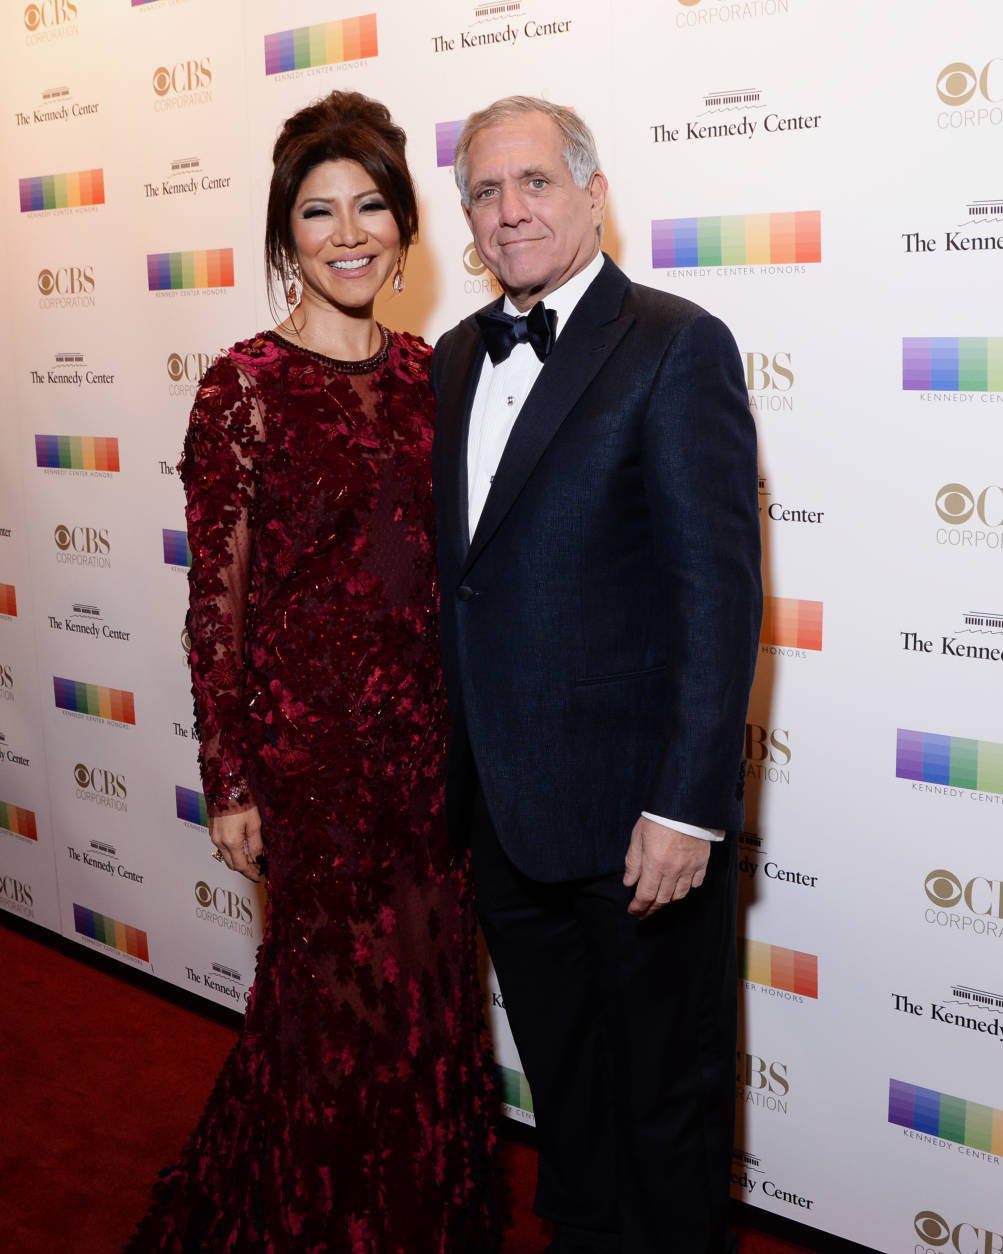 Julie Chen with her husband, president of CBS, Leslie Moonves.  (Courtesy Shannon Finney, <a href="http://www.shannonfinneyphotography.com">www.shannonfinneyphotography.com</a>)